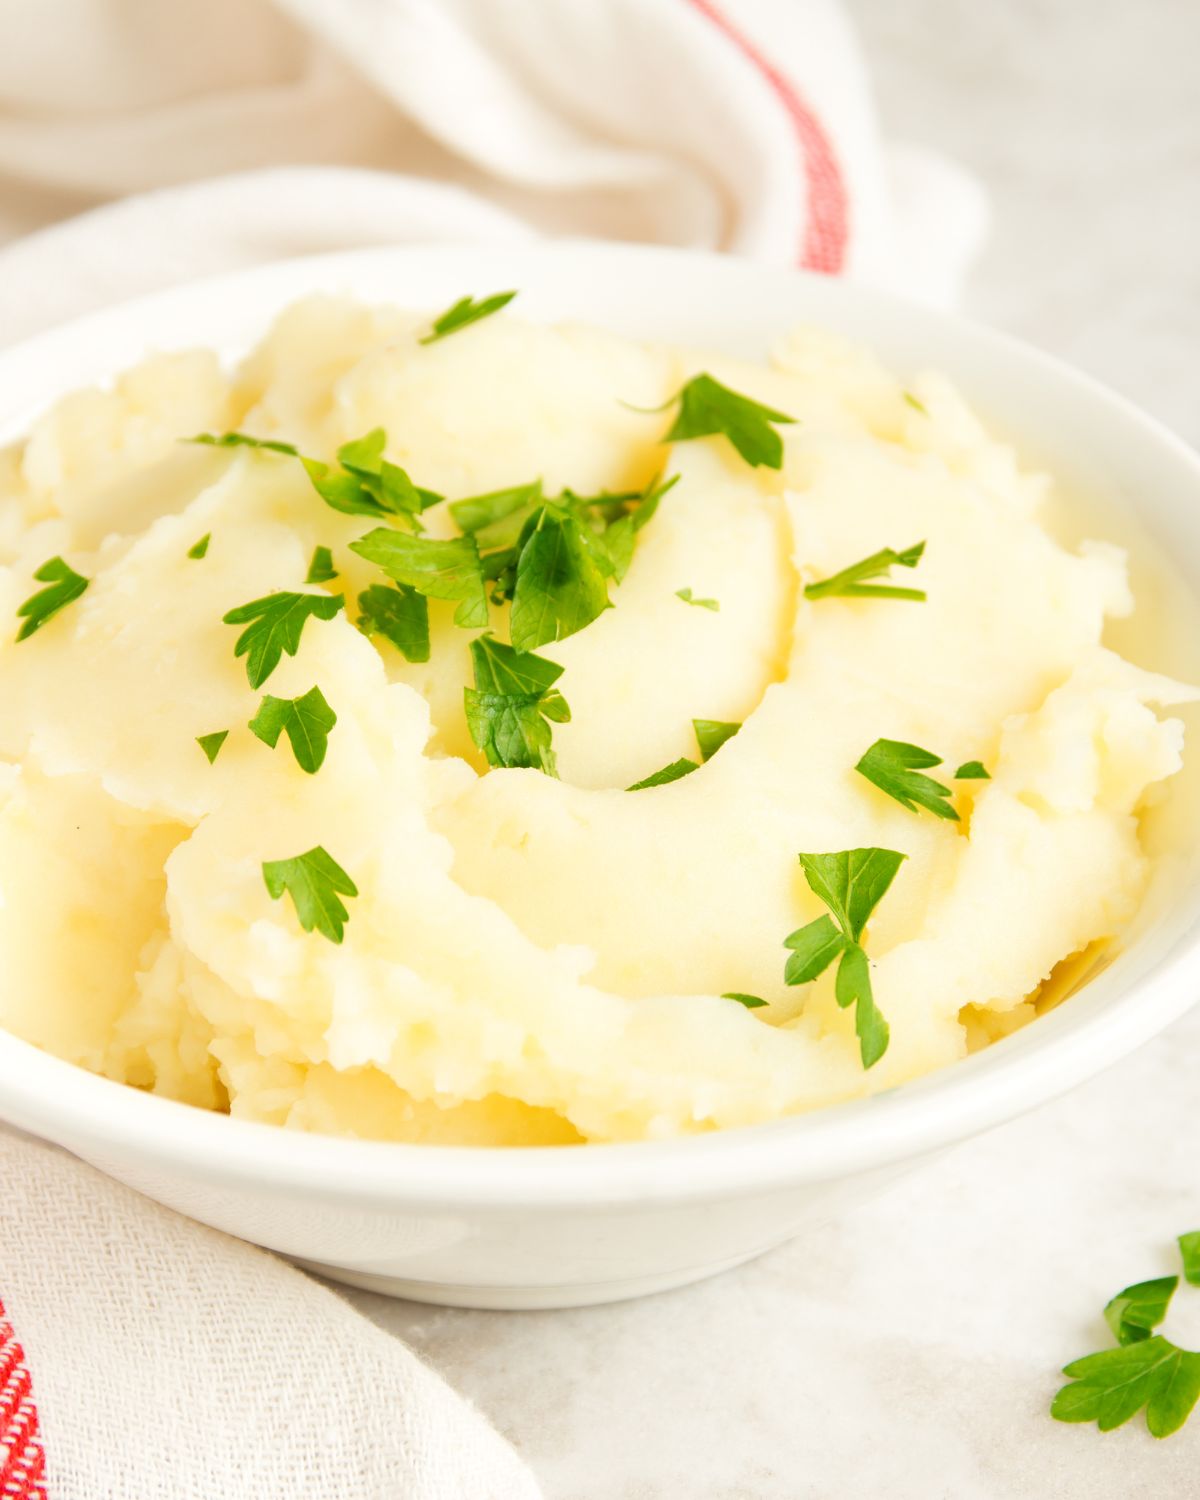 Creamy and fluffy side in a white bowl topped with fresh herbs.